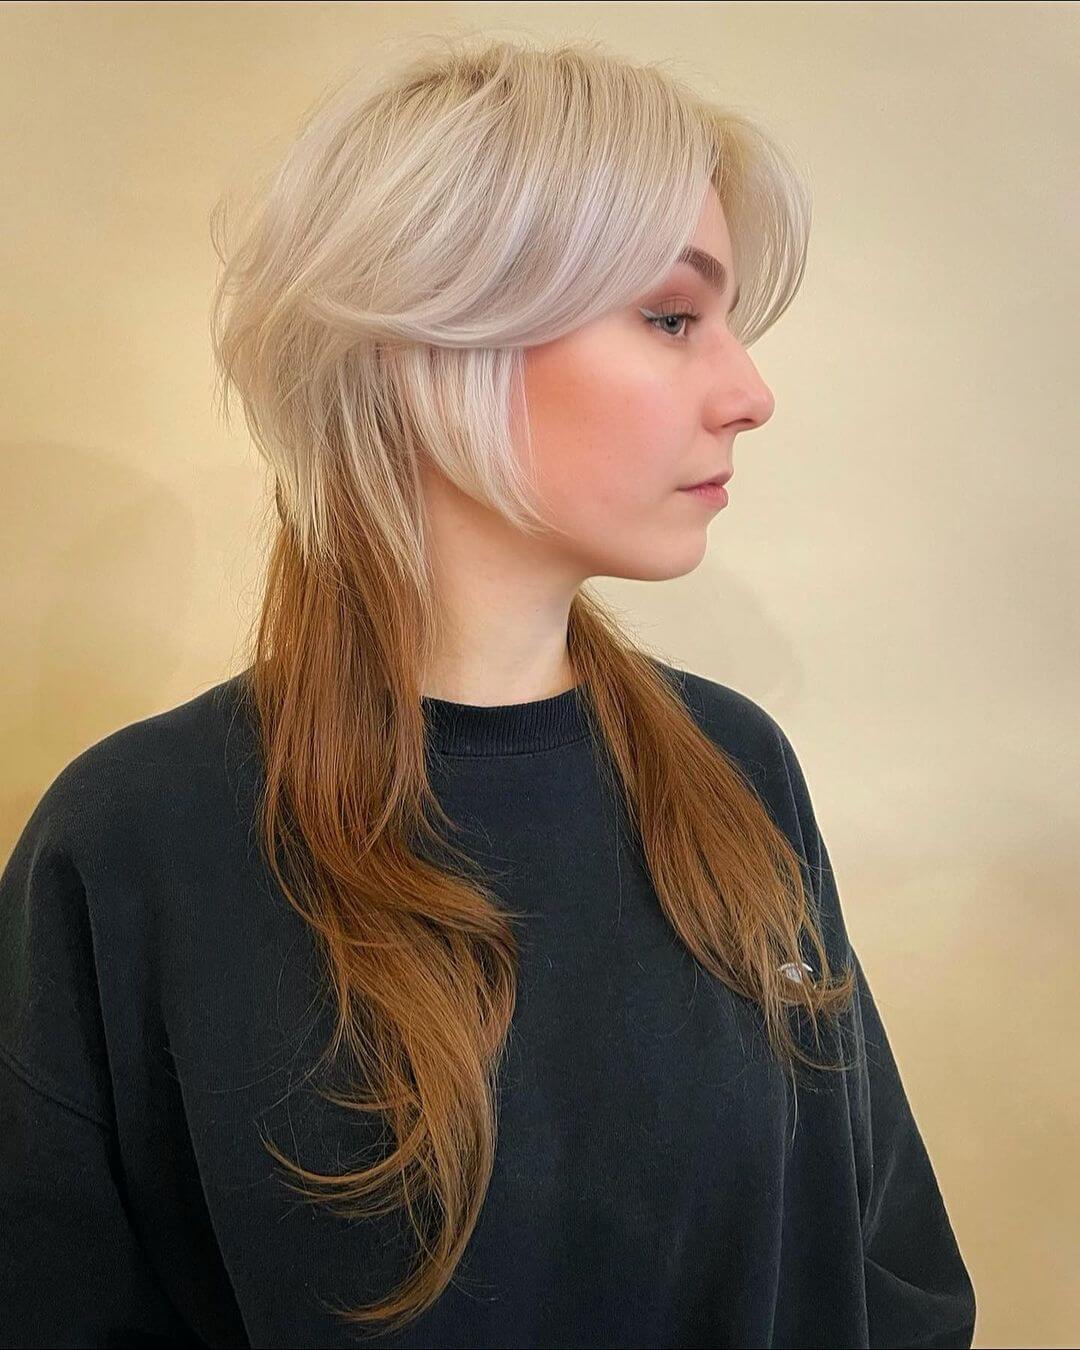 Ethereal jellyfish haircut with face-framing platinum blonde cascades and chestnut undertones.